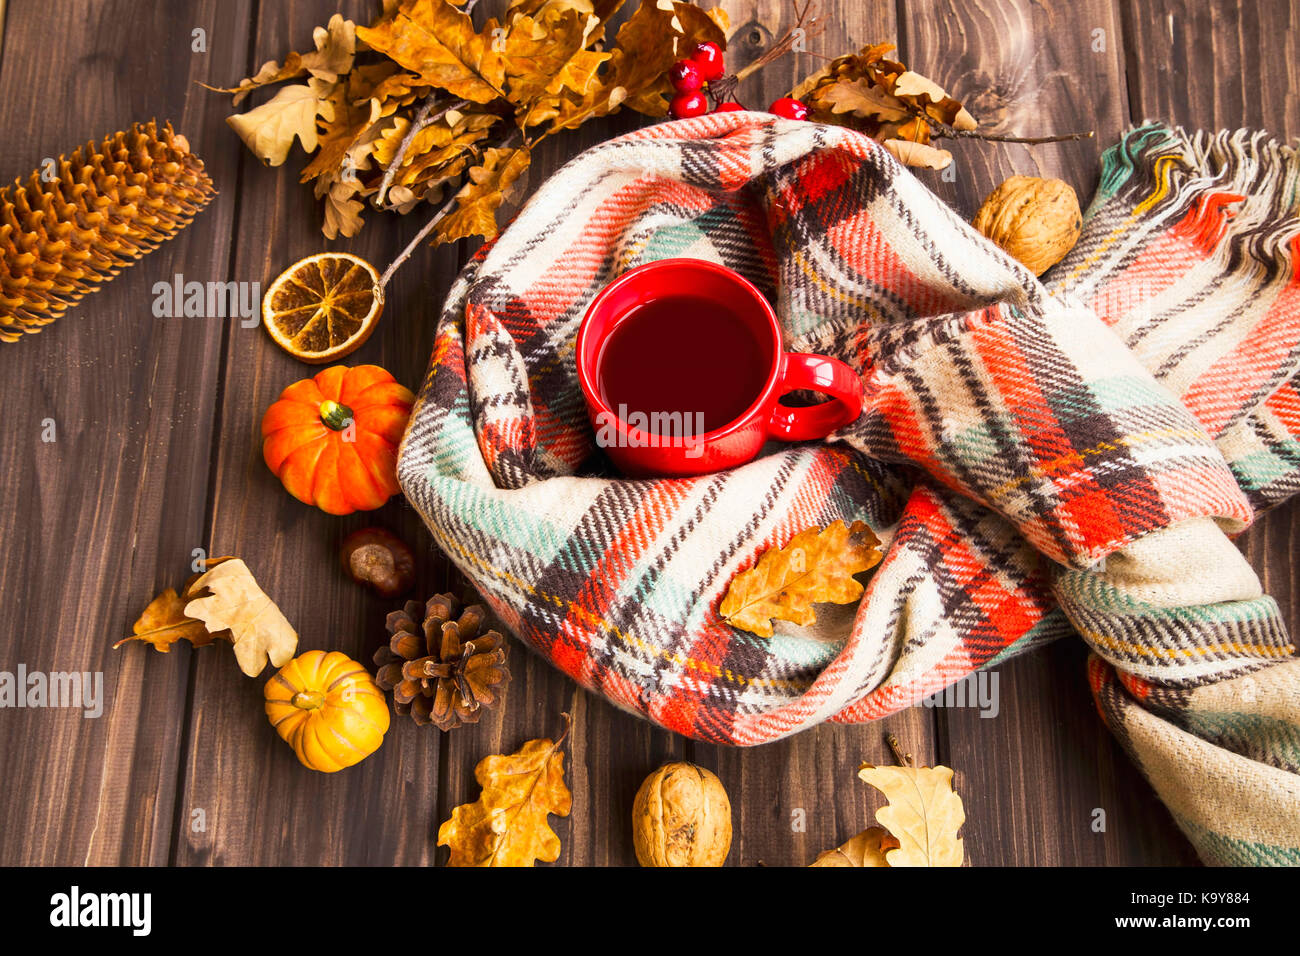 Flatlay of cozy fall setting. Scarf with tea cup and autumn decorations with pumpkins, dried leaves, pine cones on wooden background Stock Photo